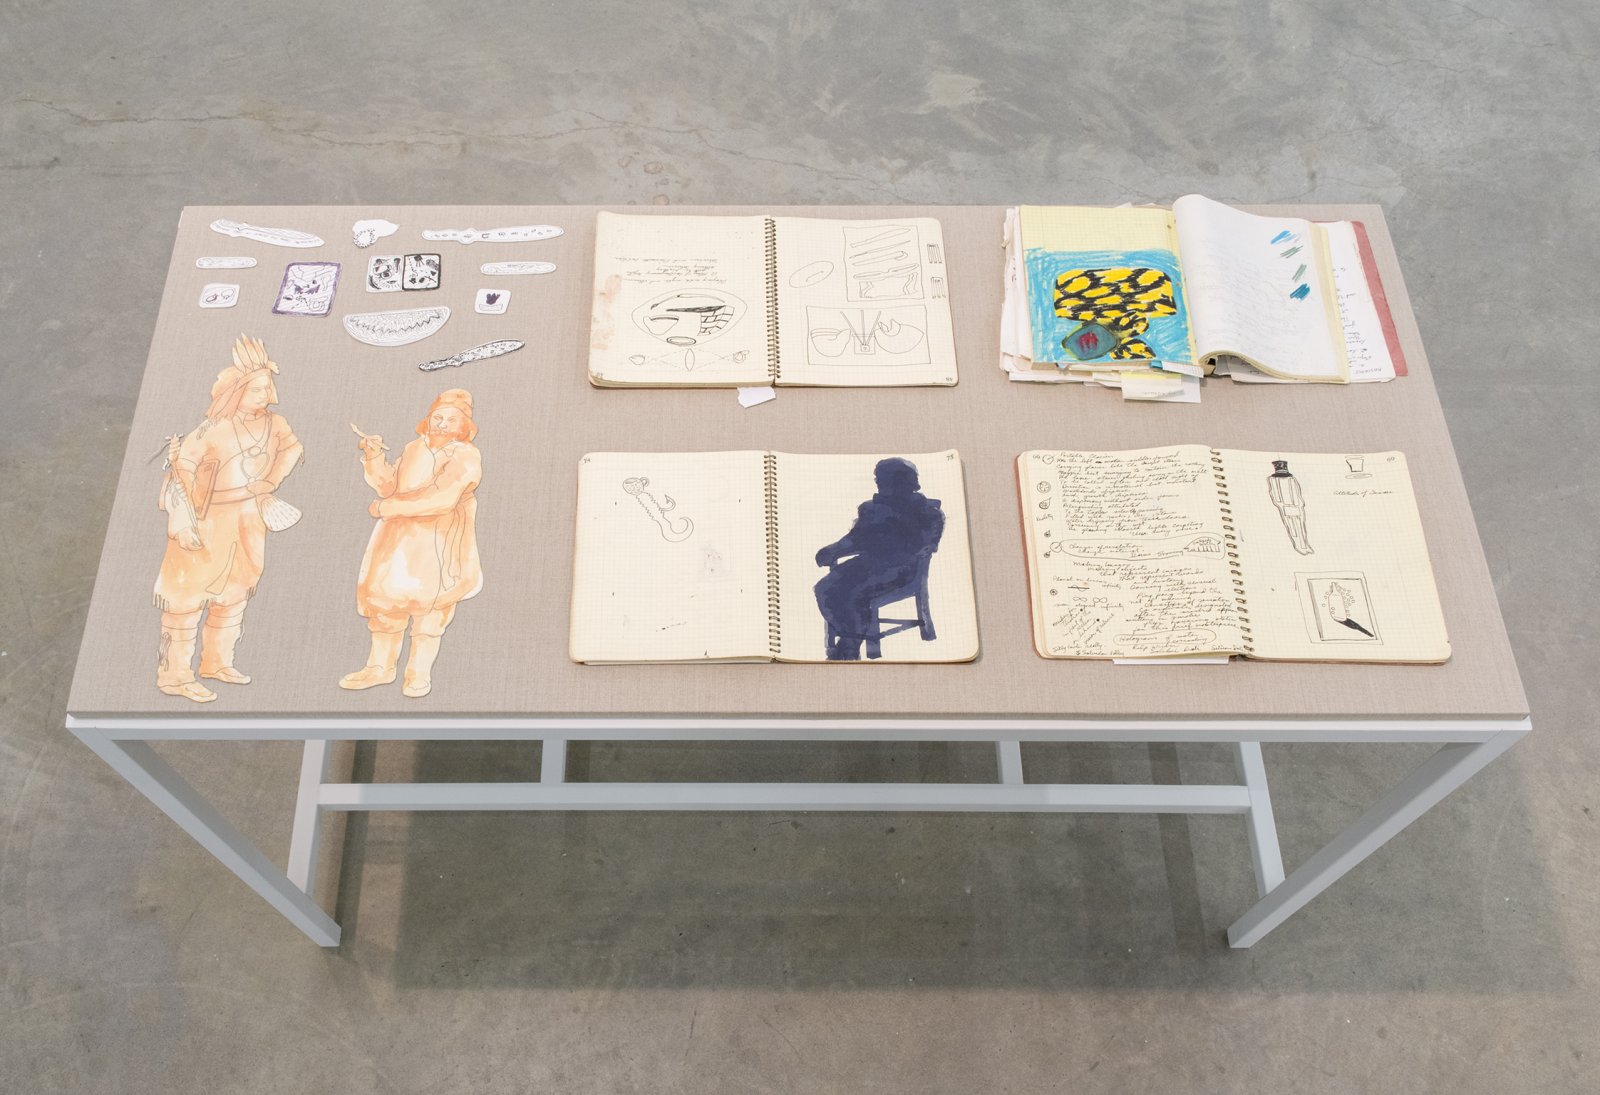 Jerry Pethick, installation view, Where Sidewalks Leap On The Table, Catriona Jeffries, 2014 ​​ by Jerry Pethick